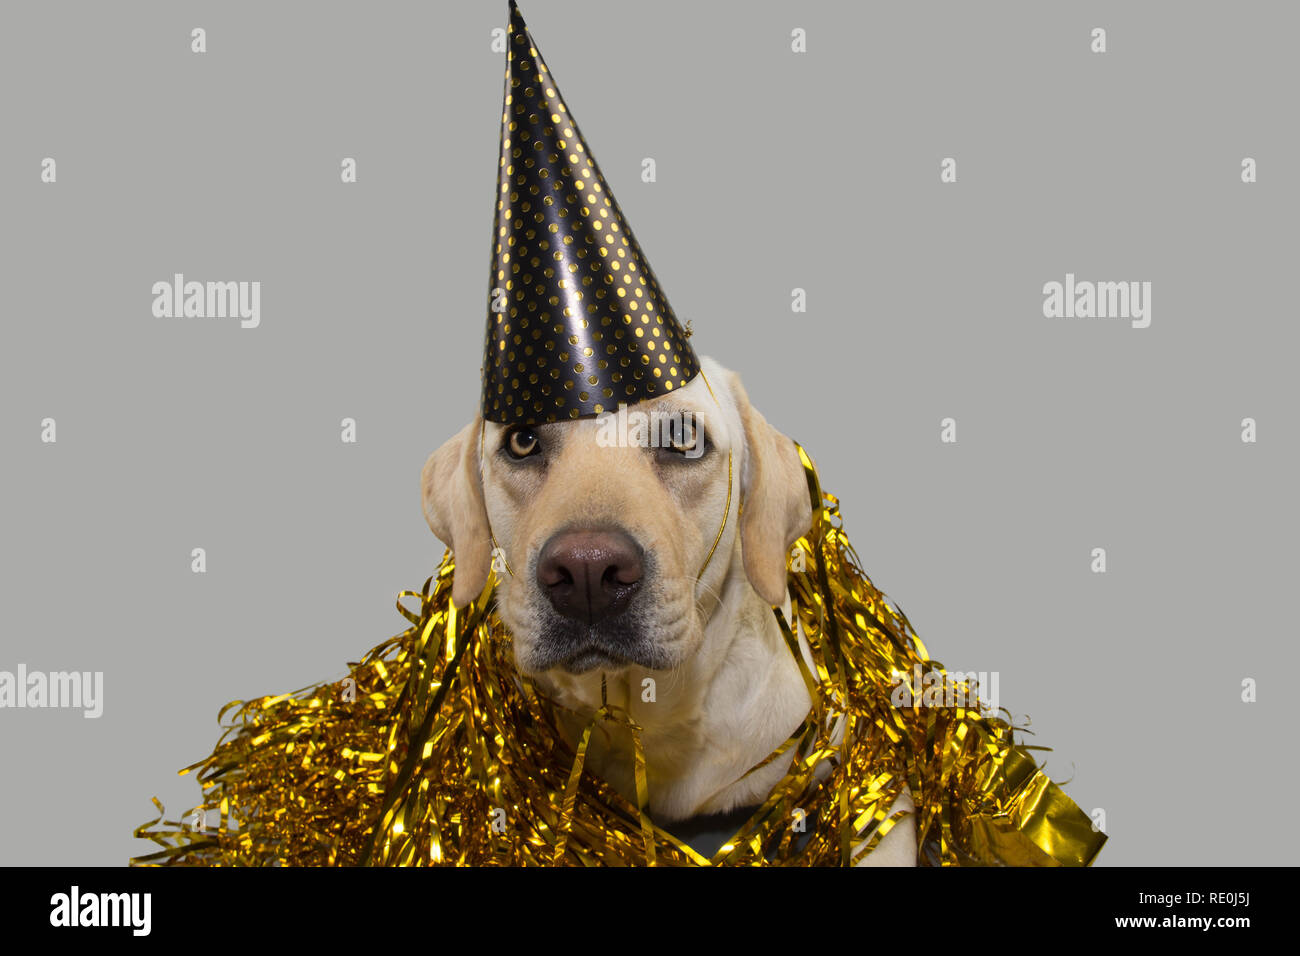 DOG NEW YEAR OR BIRTHDAY PARTY HAT. FUNNY LABRADOR LYING DOWN AGAINST GOLDEN SERPENTINES STREAMERS. ISOLATED STUDIO SHOT ON GRAY BACKGROUND. Stock Photo